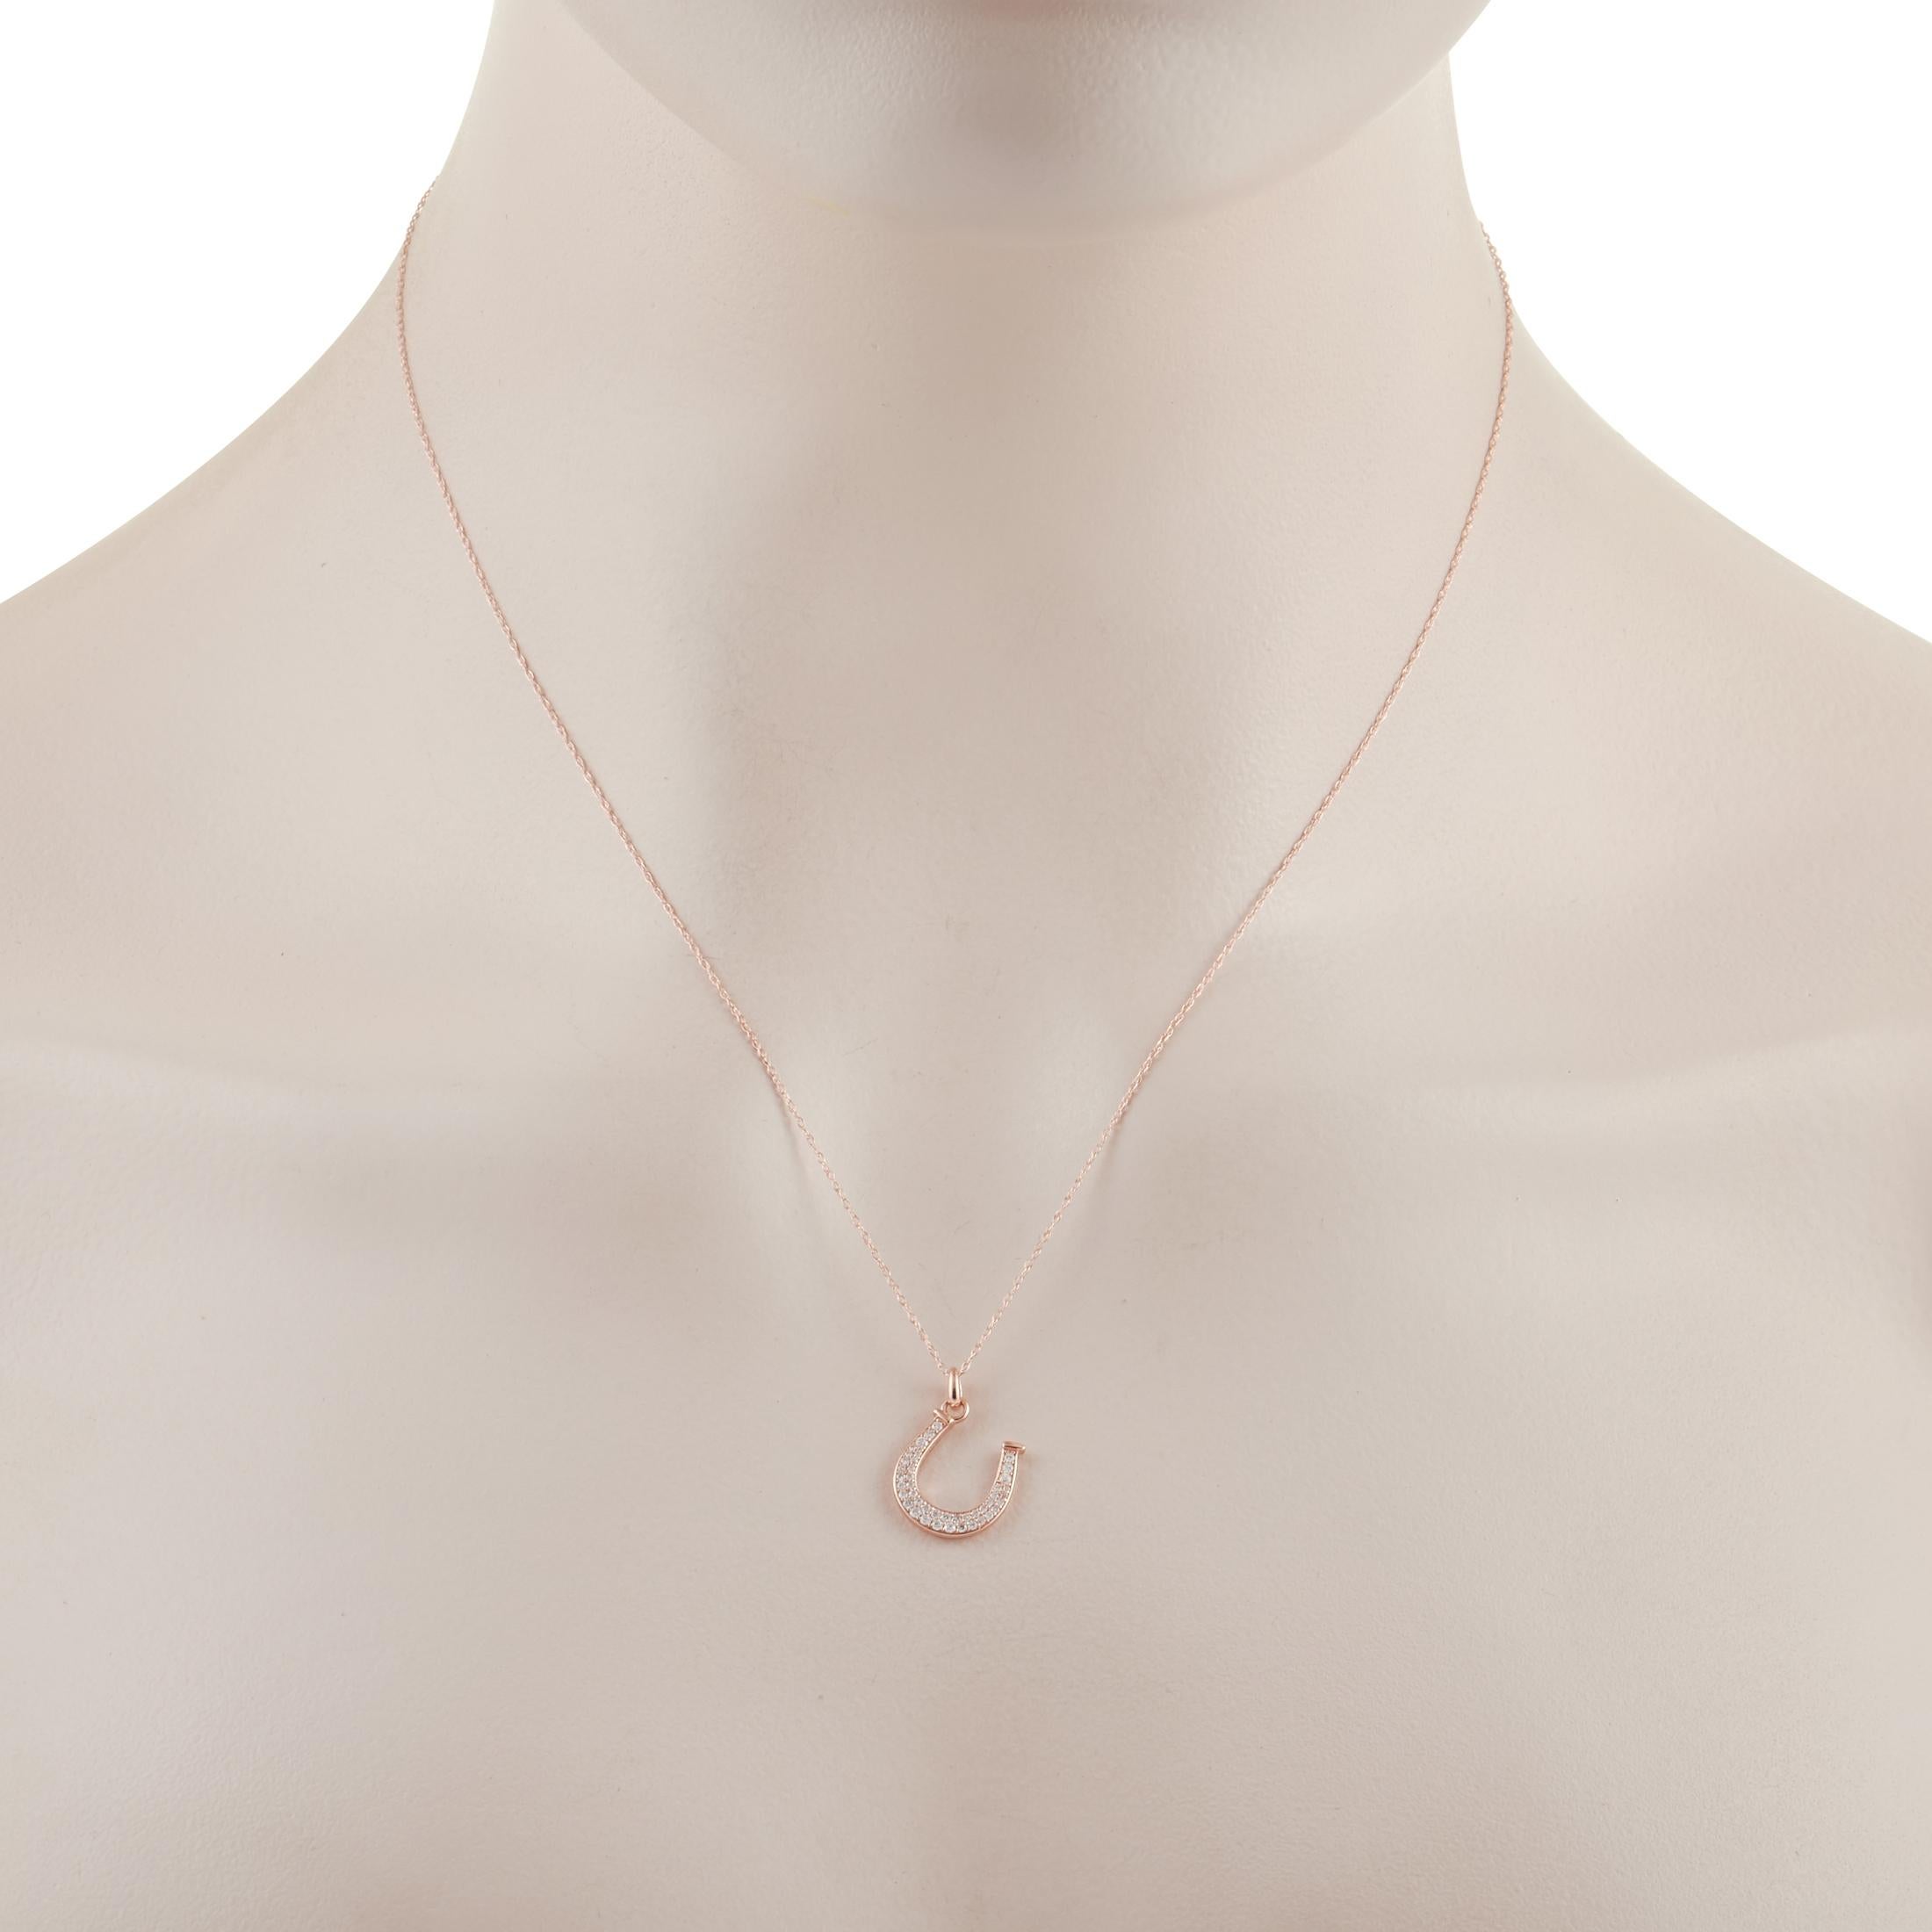 Anyone who could use a luxurious good luck charm will fall in love with this elegant necklace. Suspended from an 18” chain, you’ll find a horseshoe-shaped pendant measuring .75” long and .55” wide. It’s accented by glittering inset diamond gemstones